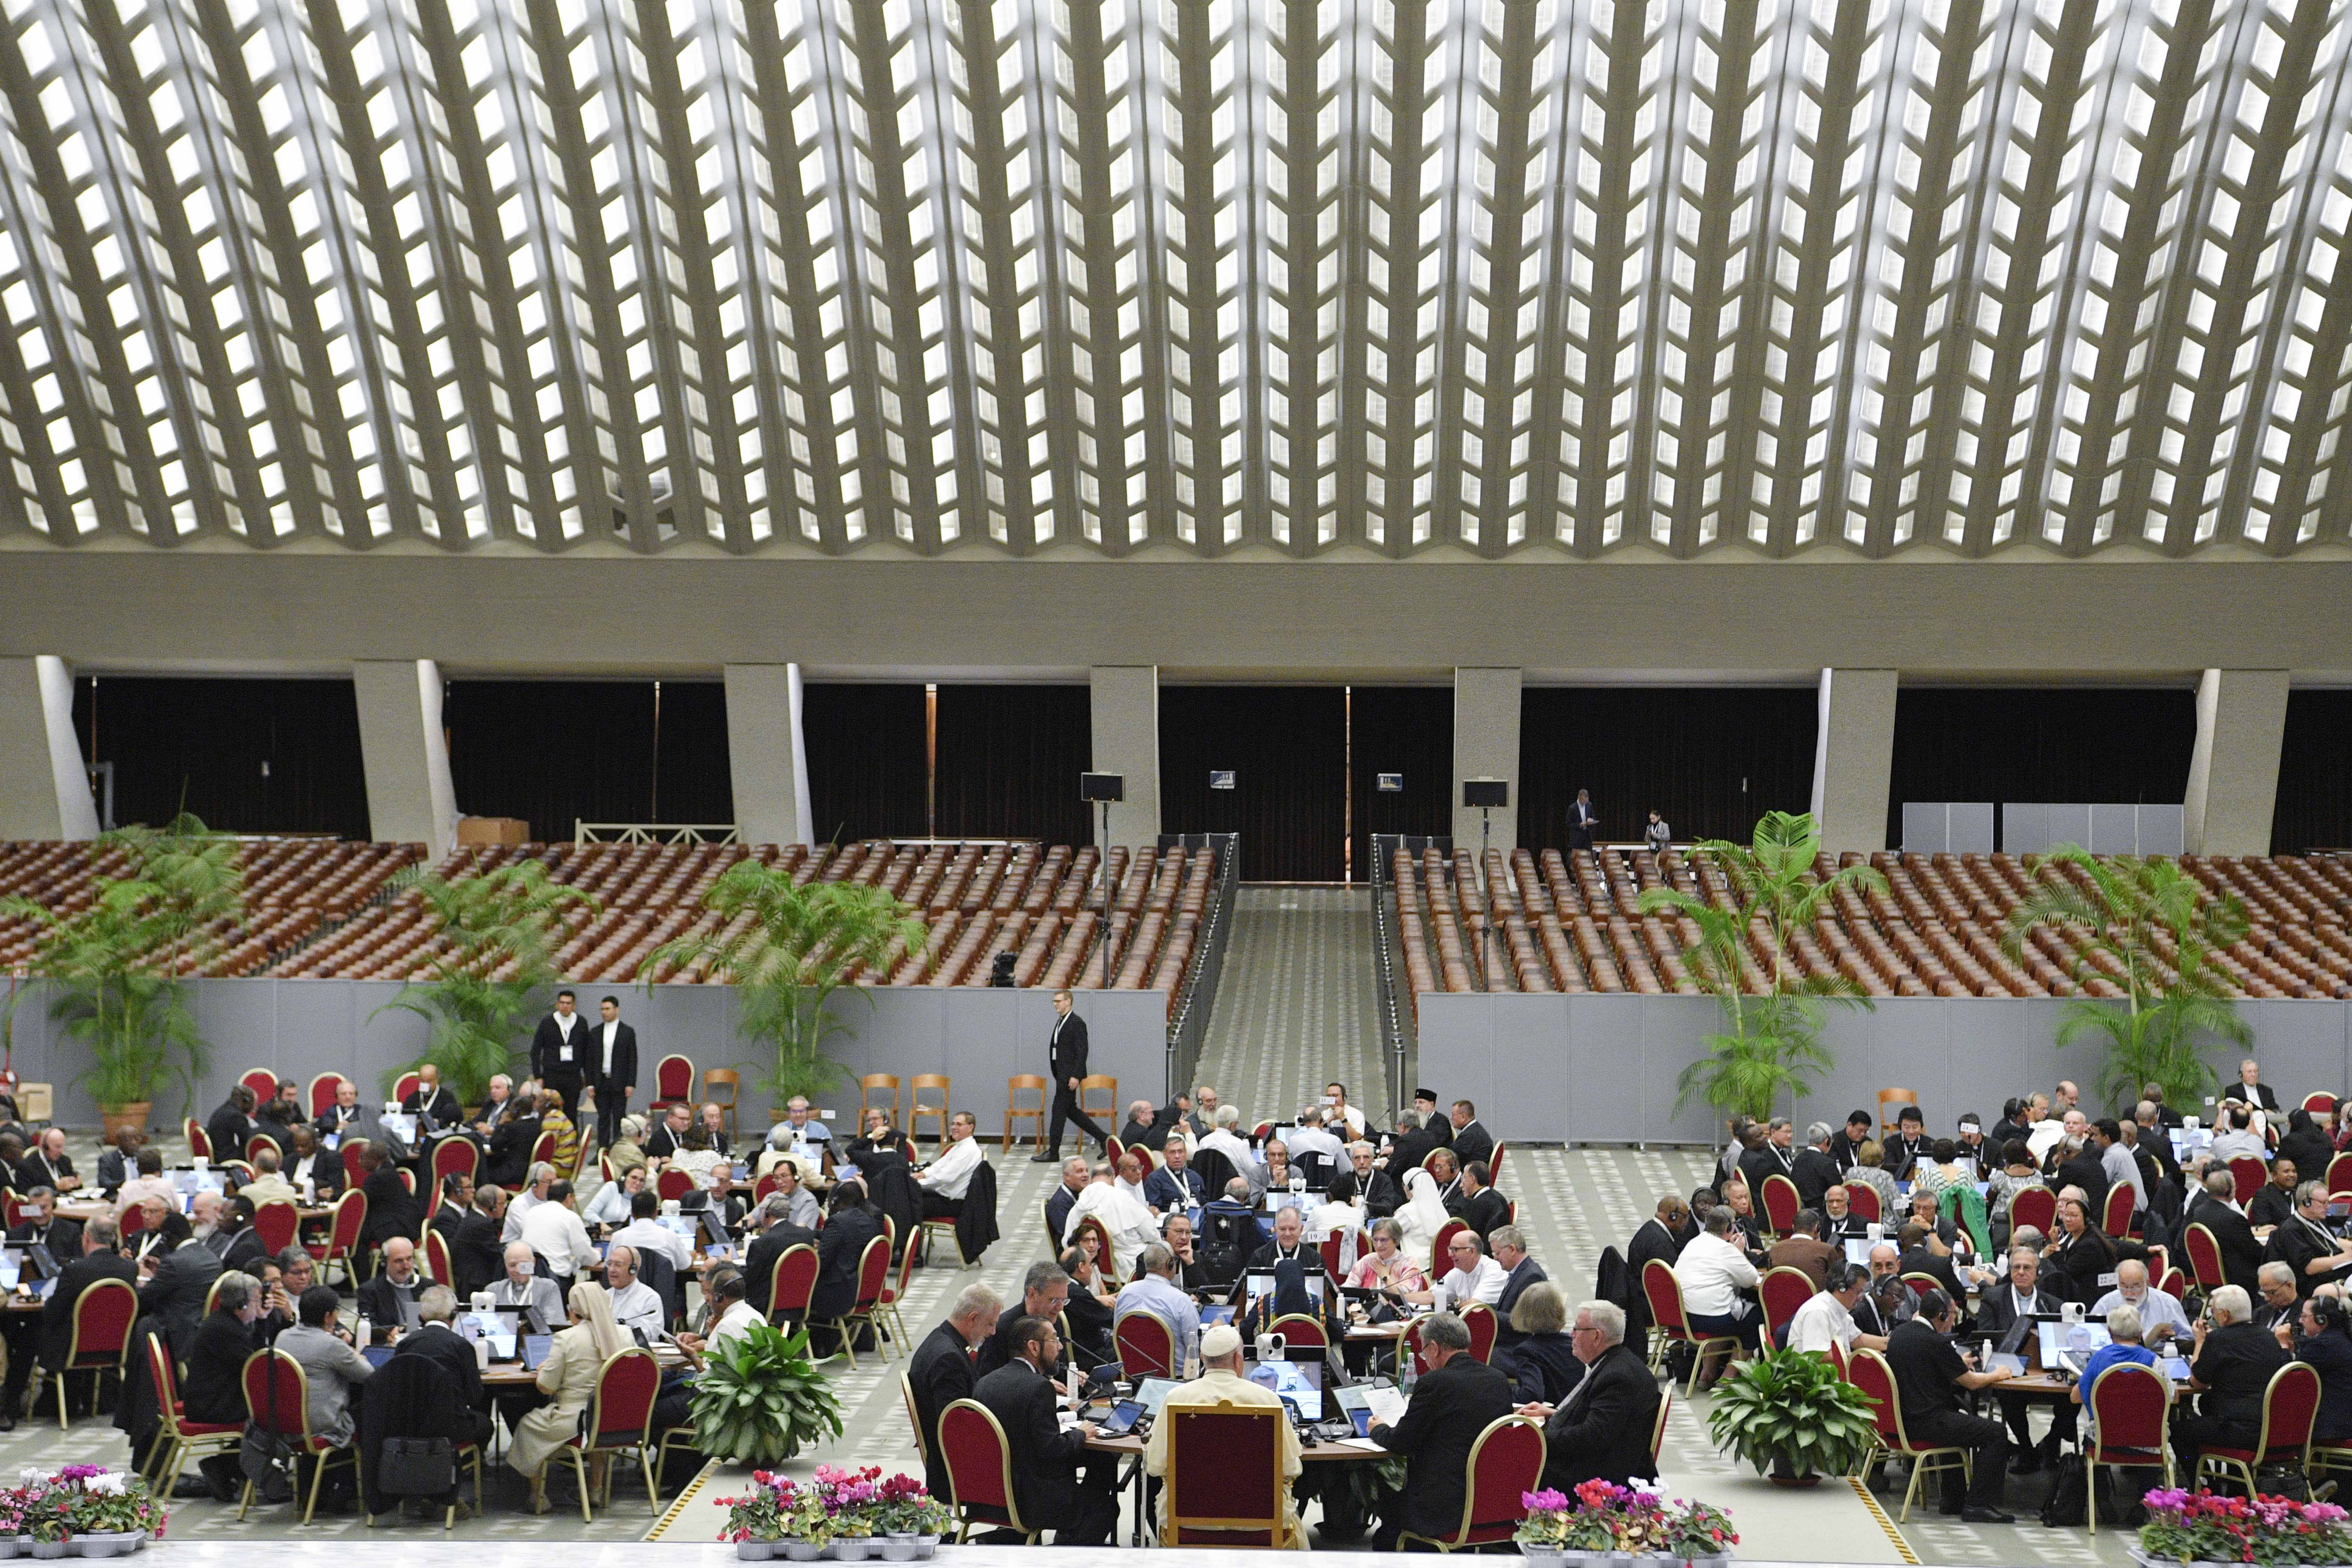 Synod on Synodality members ask ‘for greater discernment’ of Church teaching on sexuality